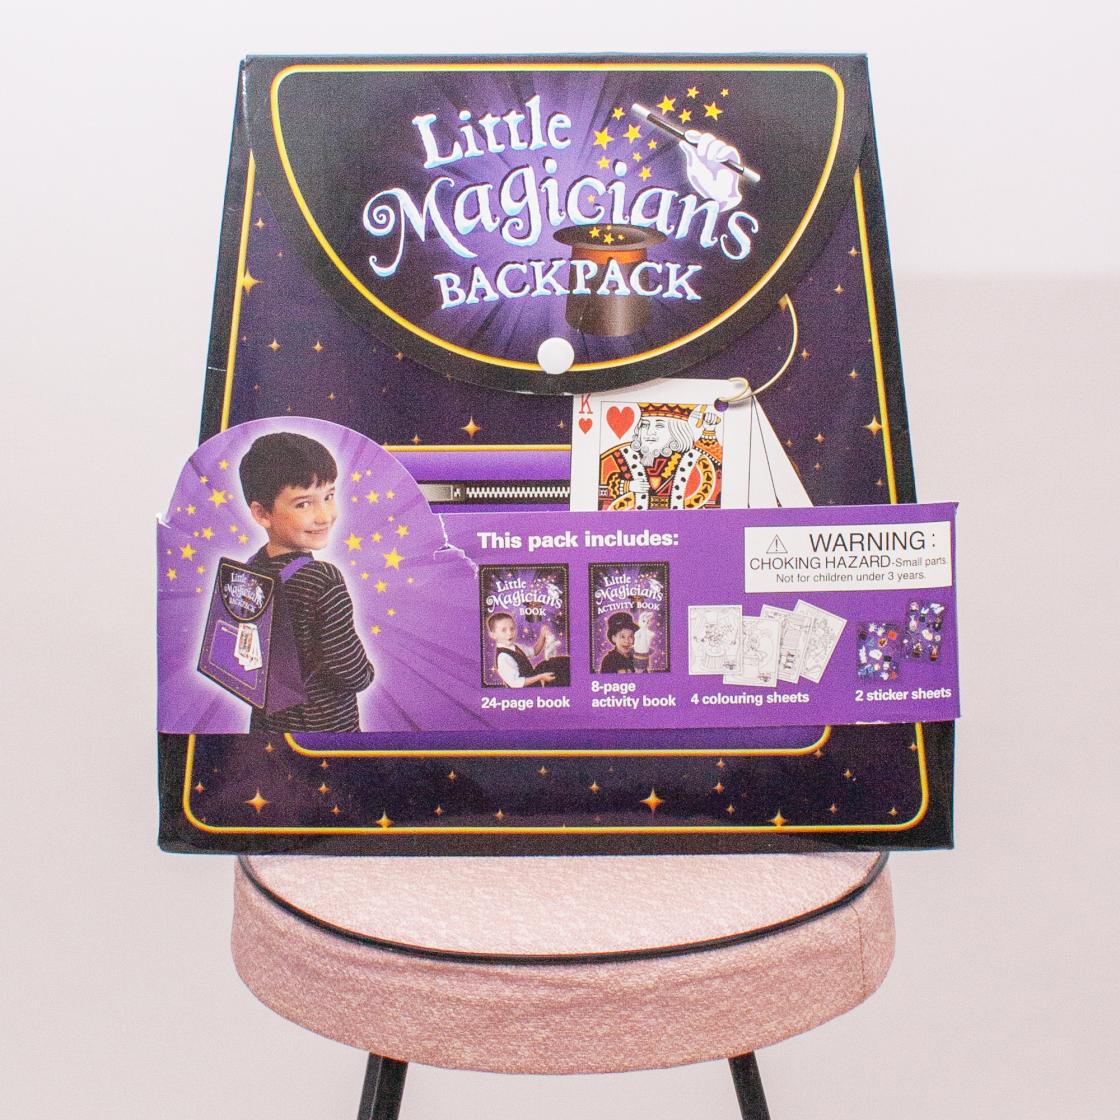 Little Magicians Backpack "Brand New"